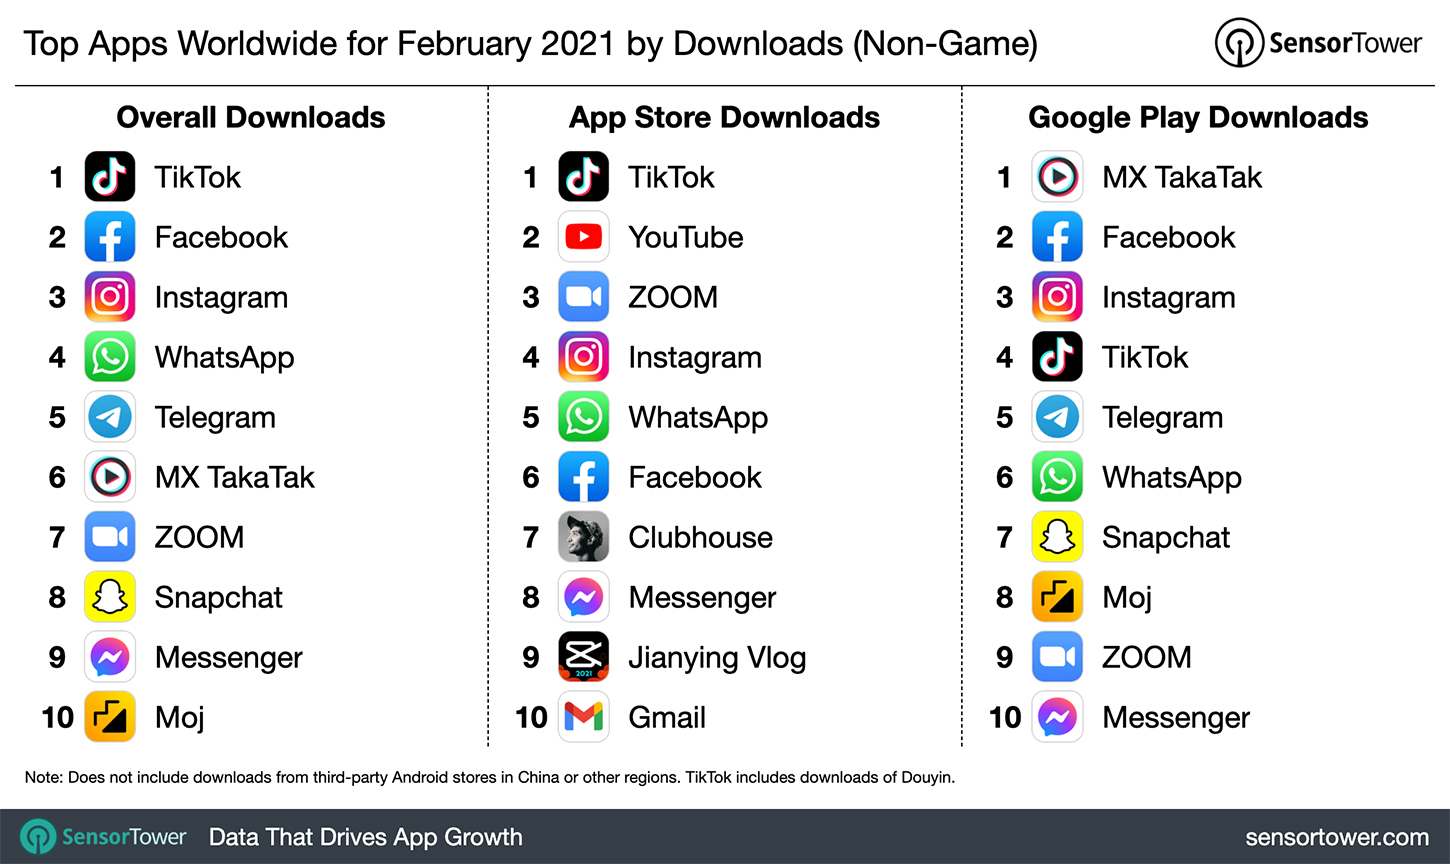 Top Apps Worldwide for February 2021 by Downloads